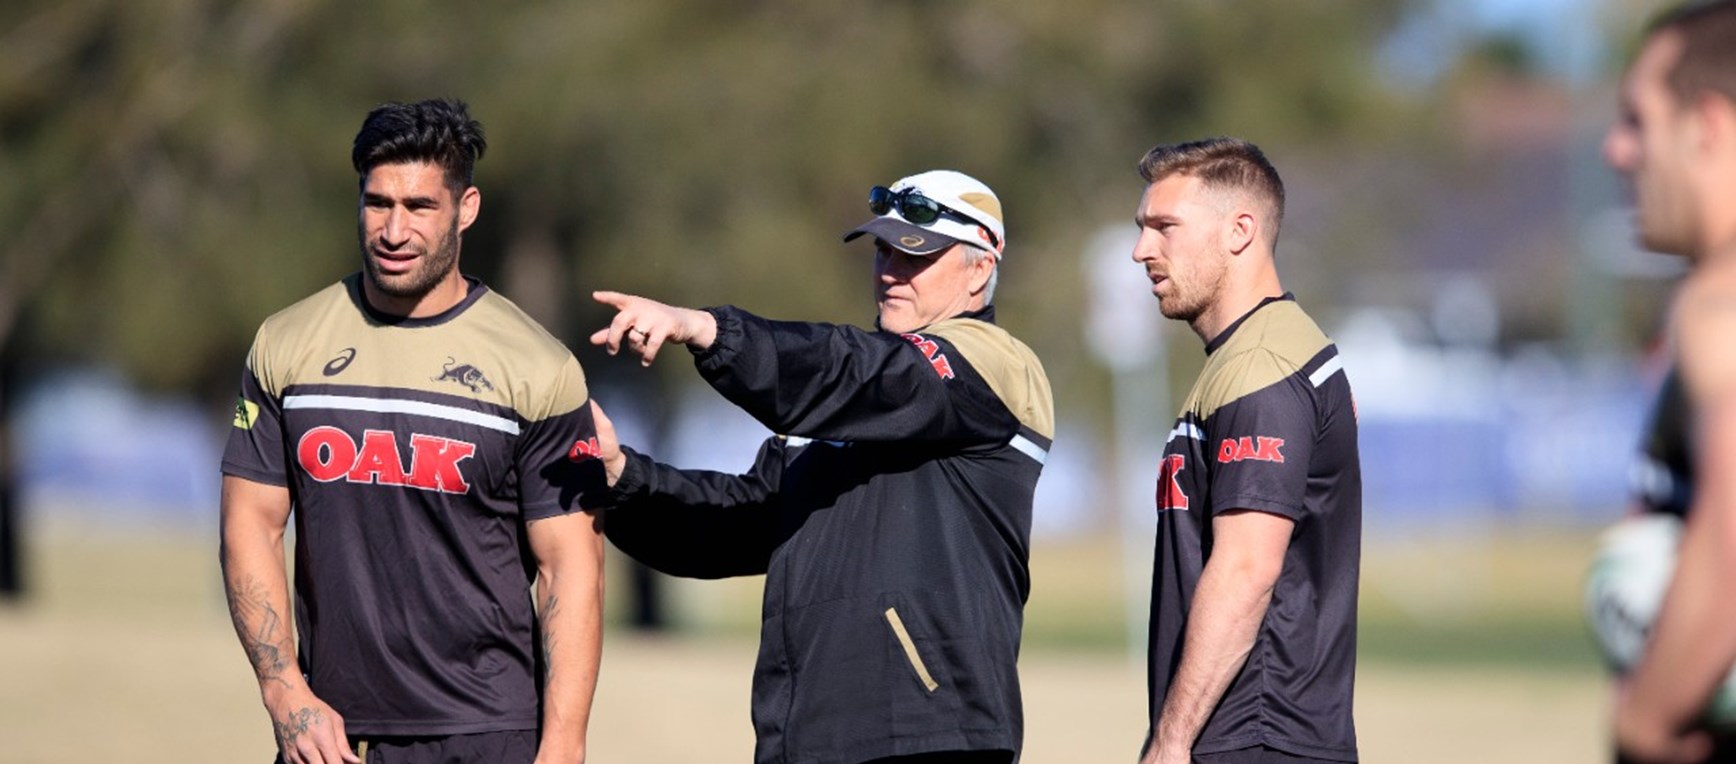 Gallery: Panthers ready for Raiders